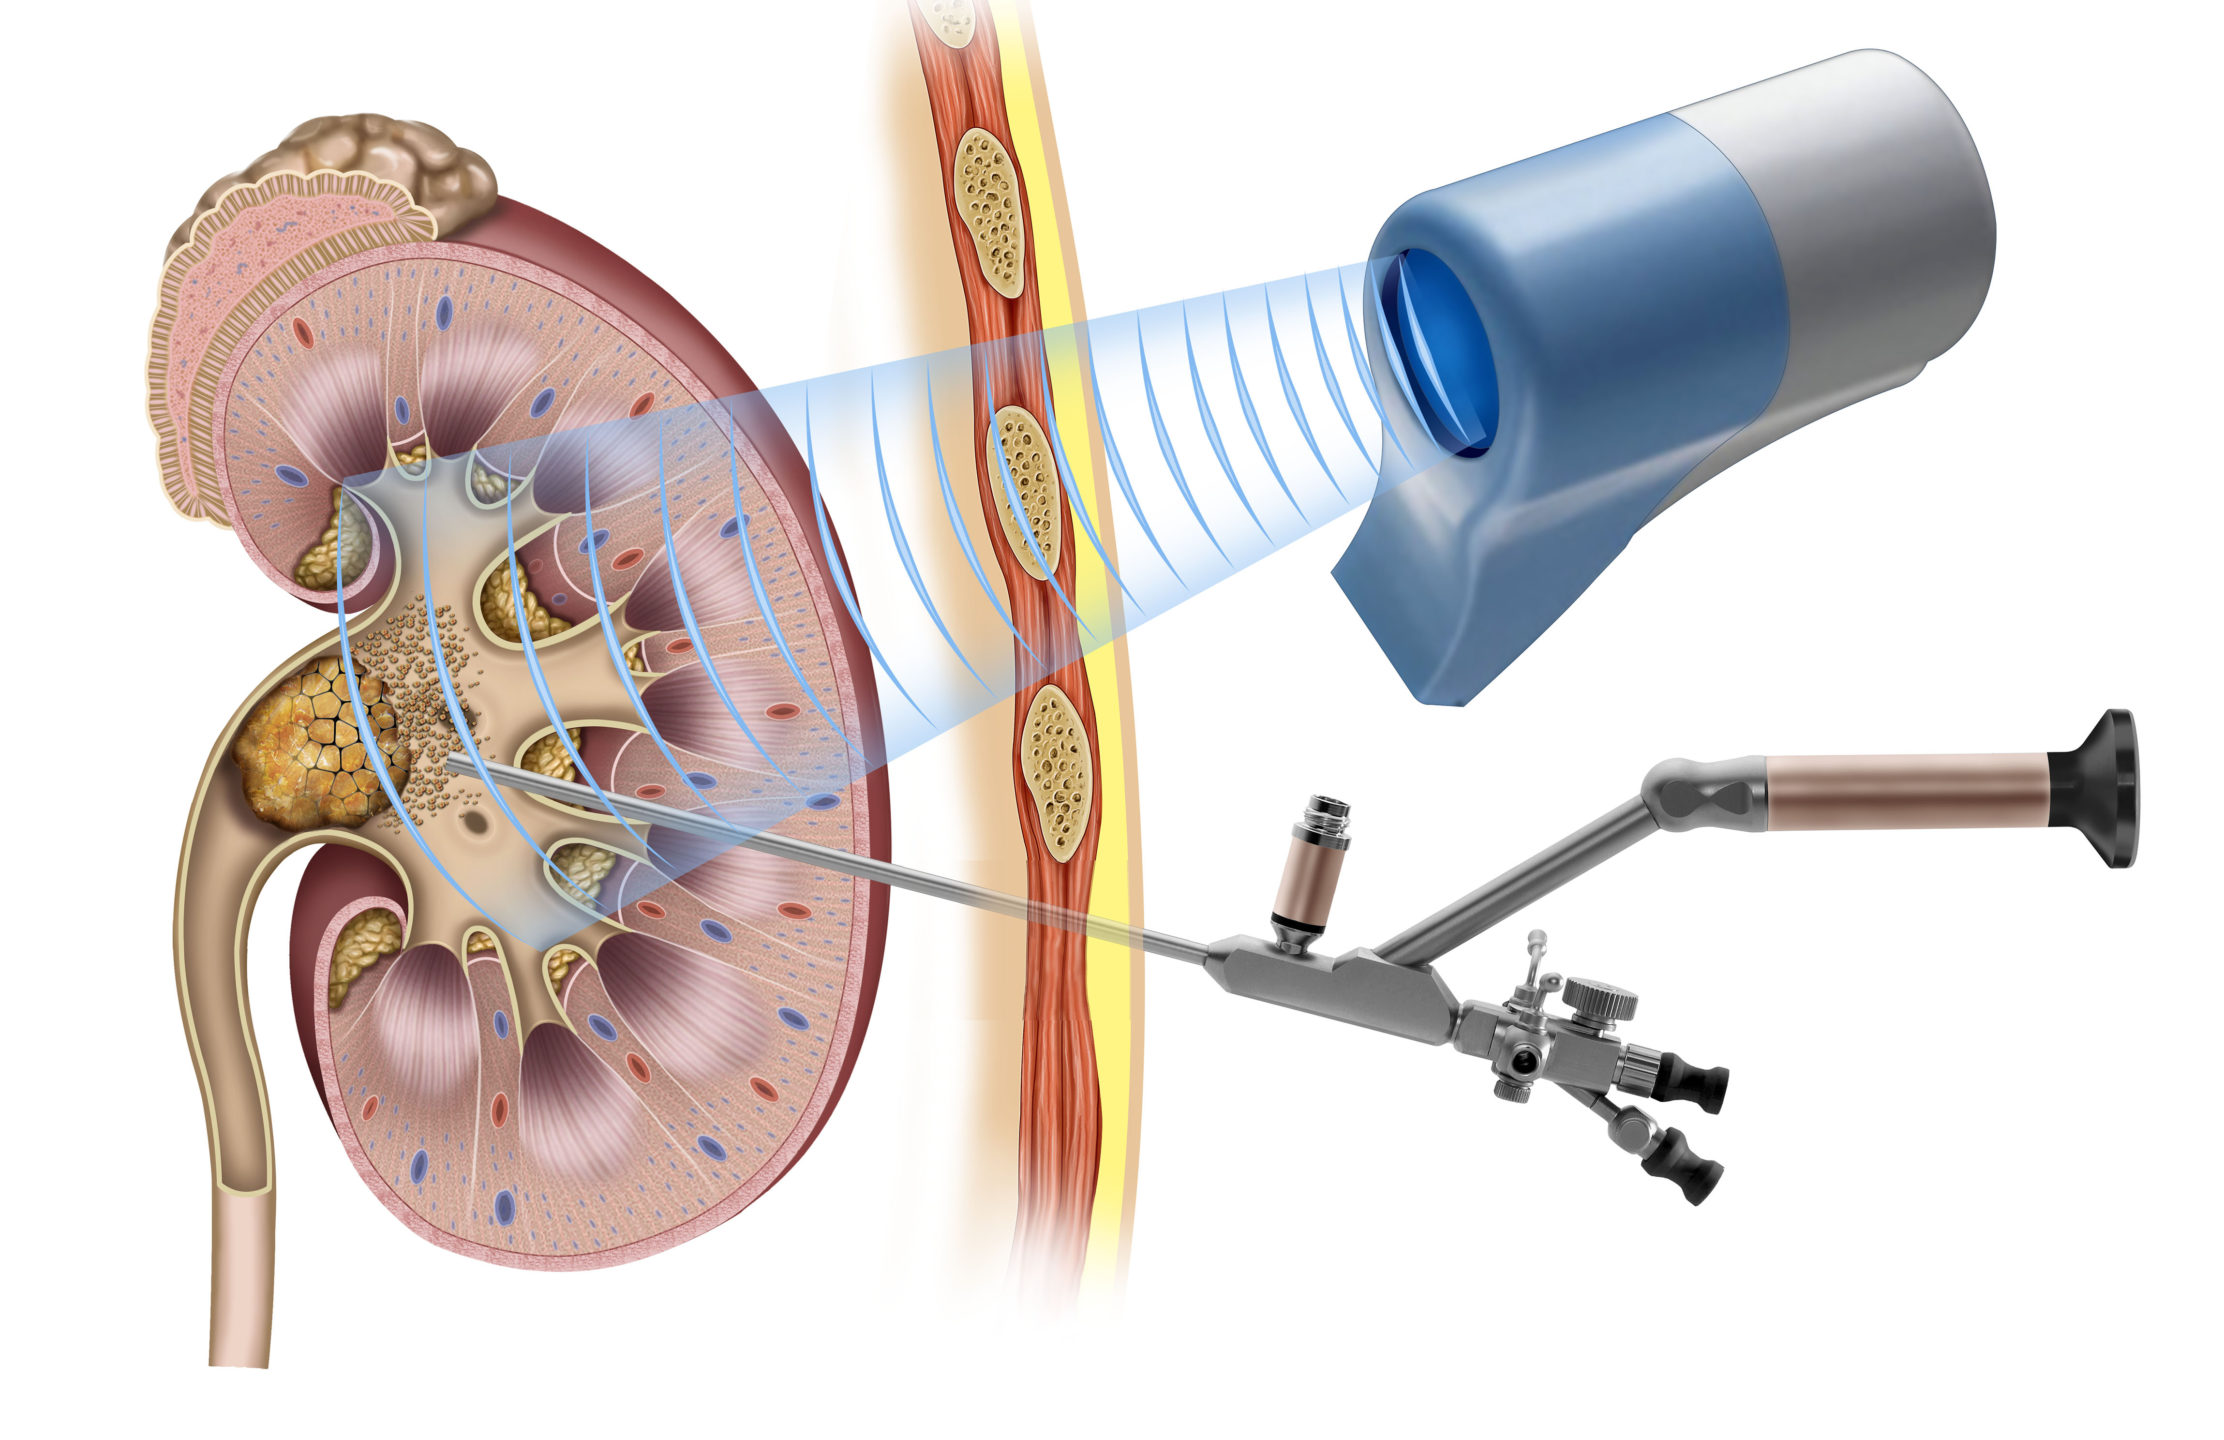  An illustration of a kidney & a kidney stone with kidney stone extracorporeal shockwave therapy sound waves breaking it up. 